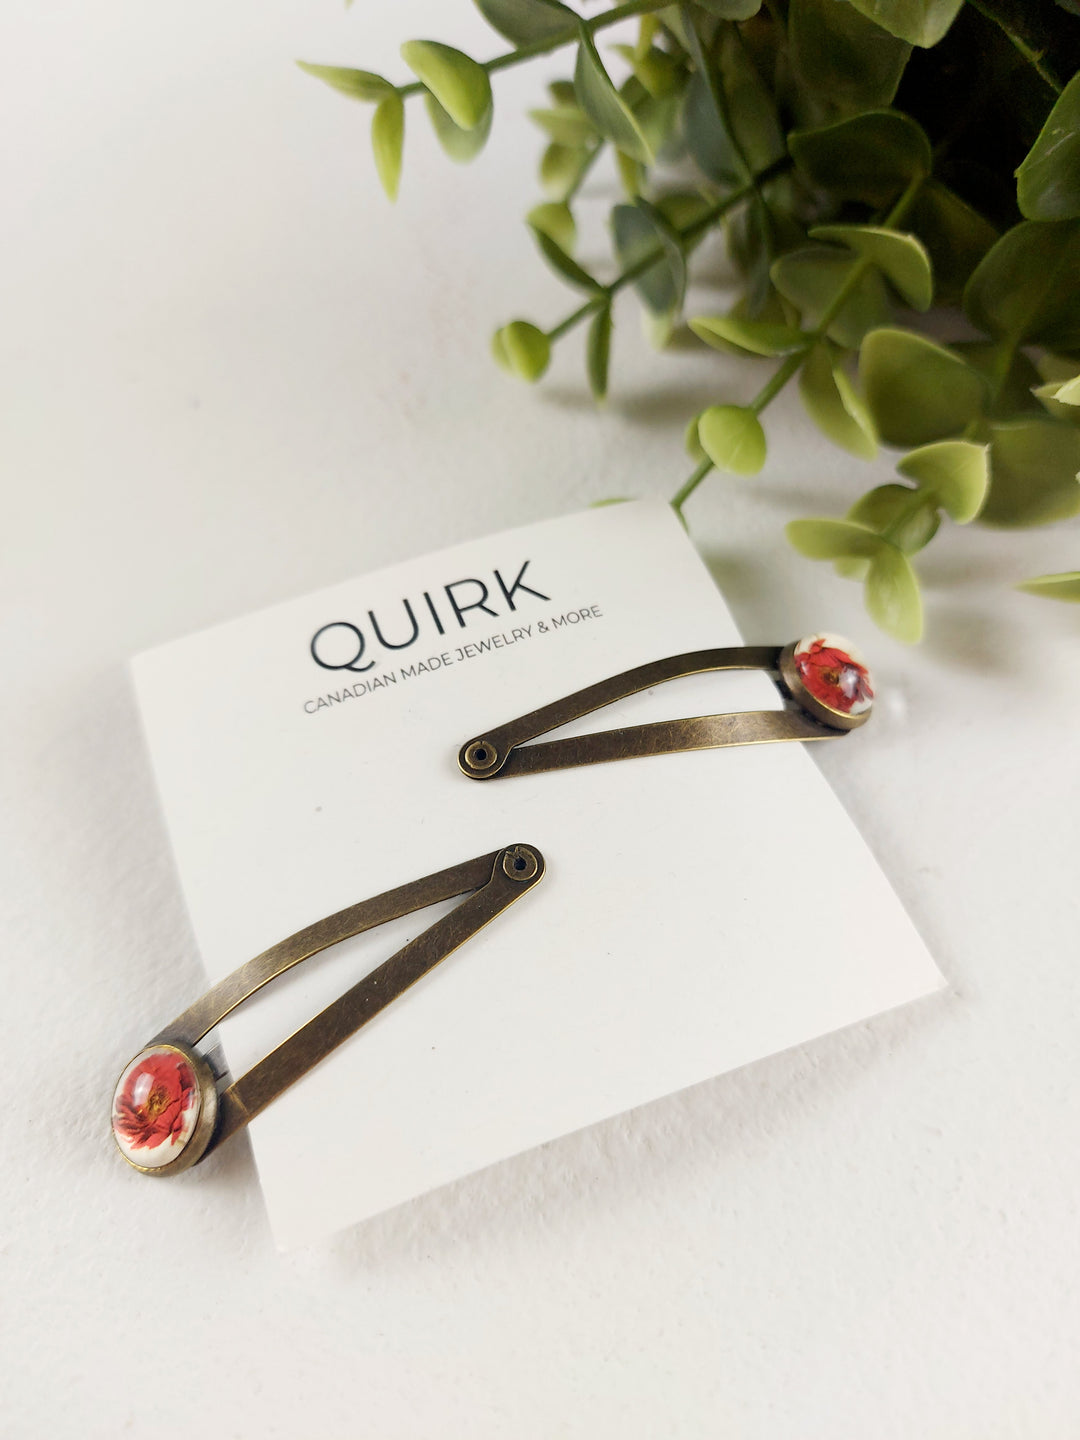 Quirk Handmade Jewelry, Jeweled Hair Accessories